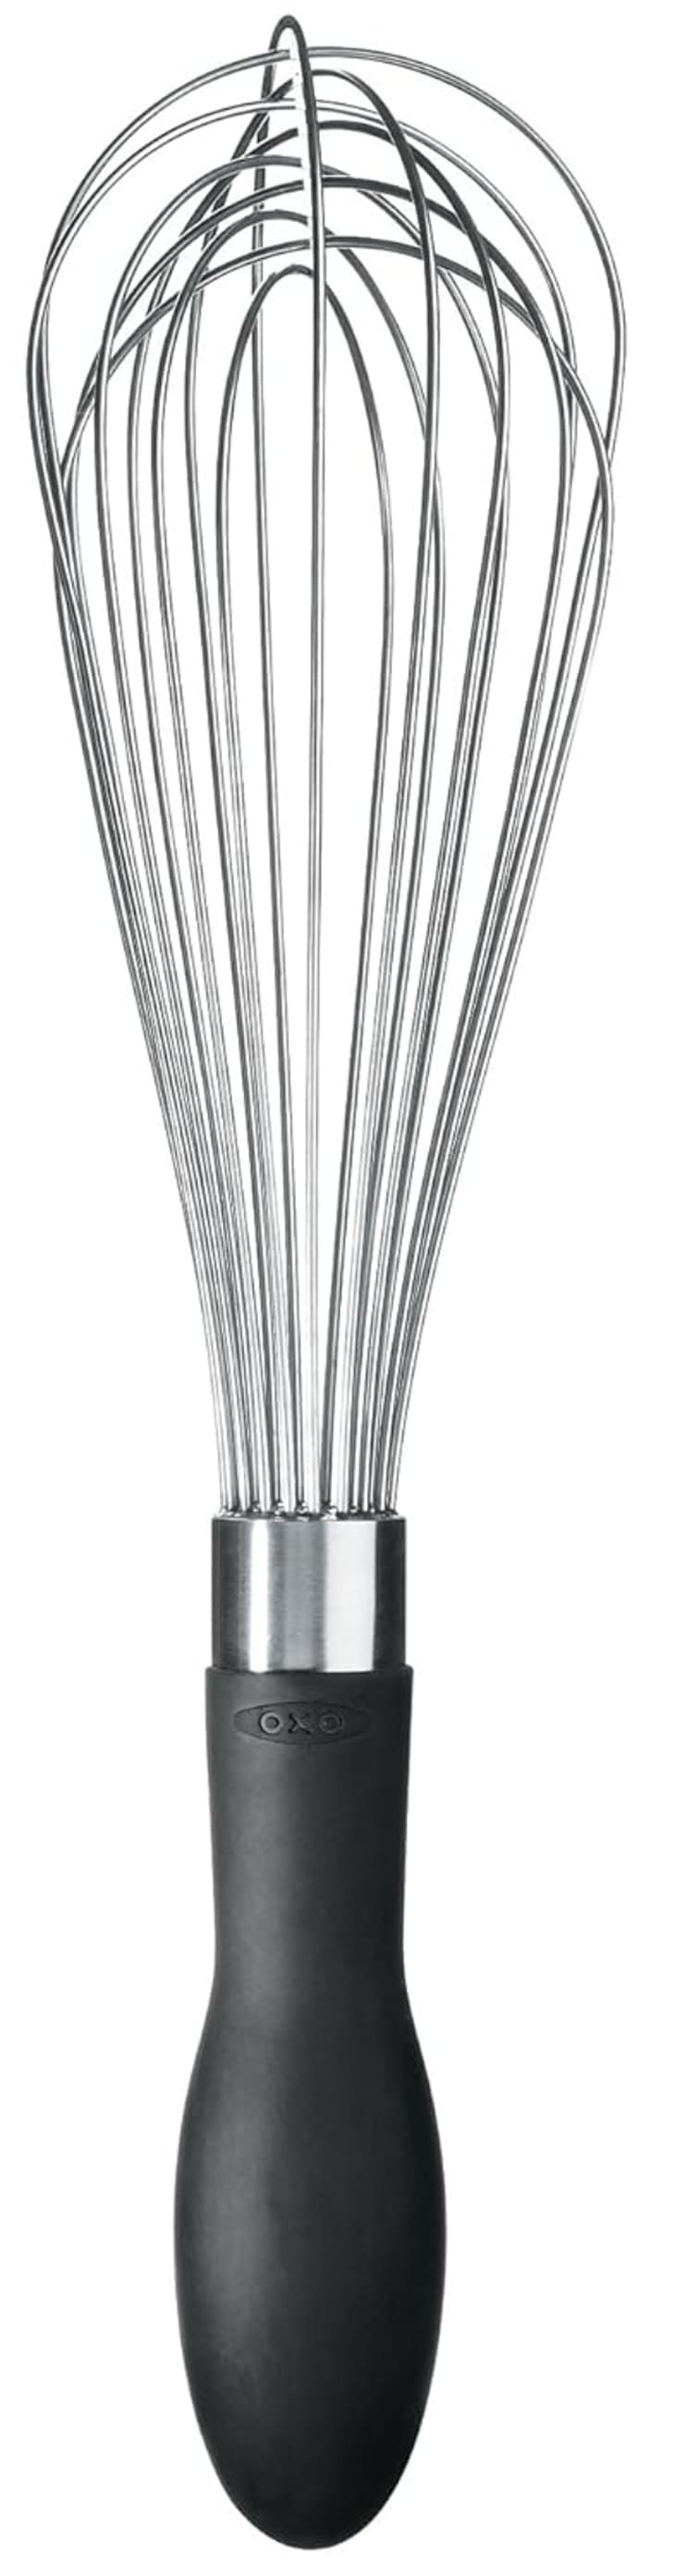 OXO Good Grips 11-Inch Balloon Whisk at Amazon